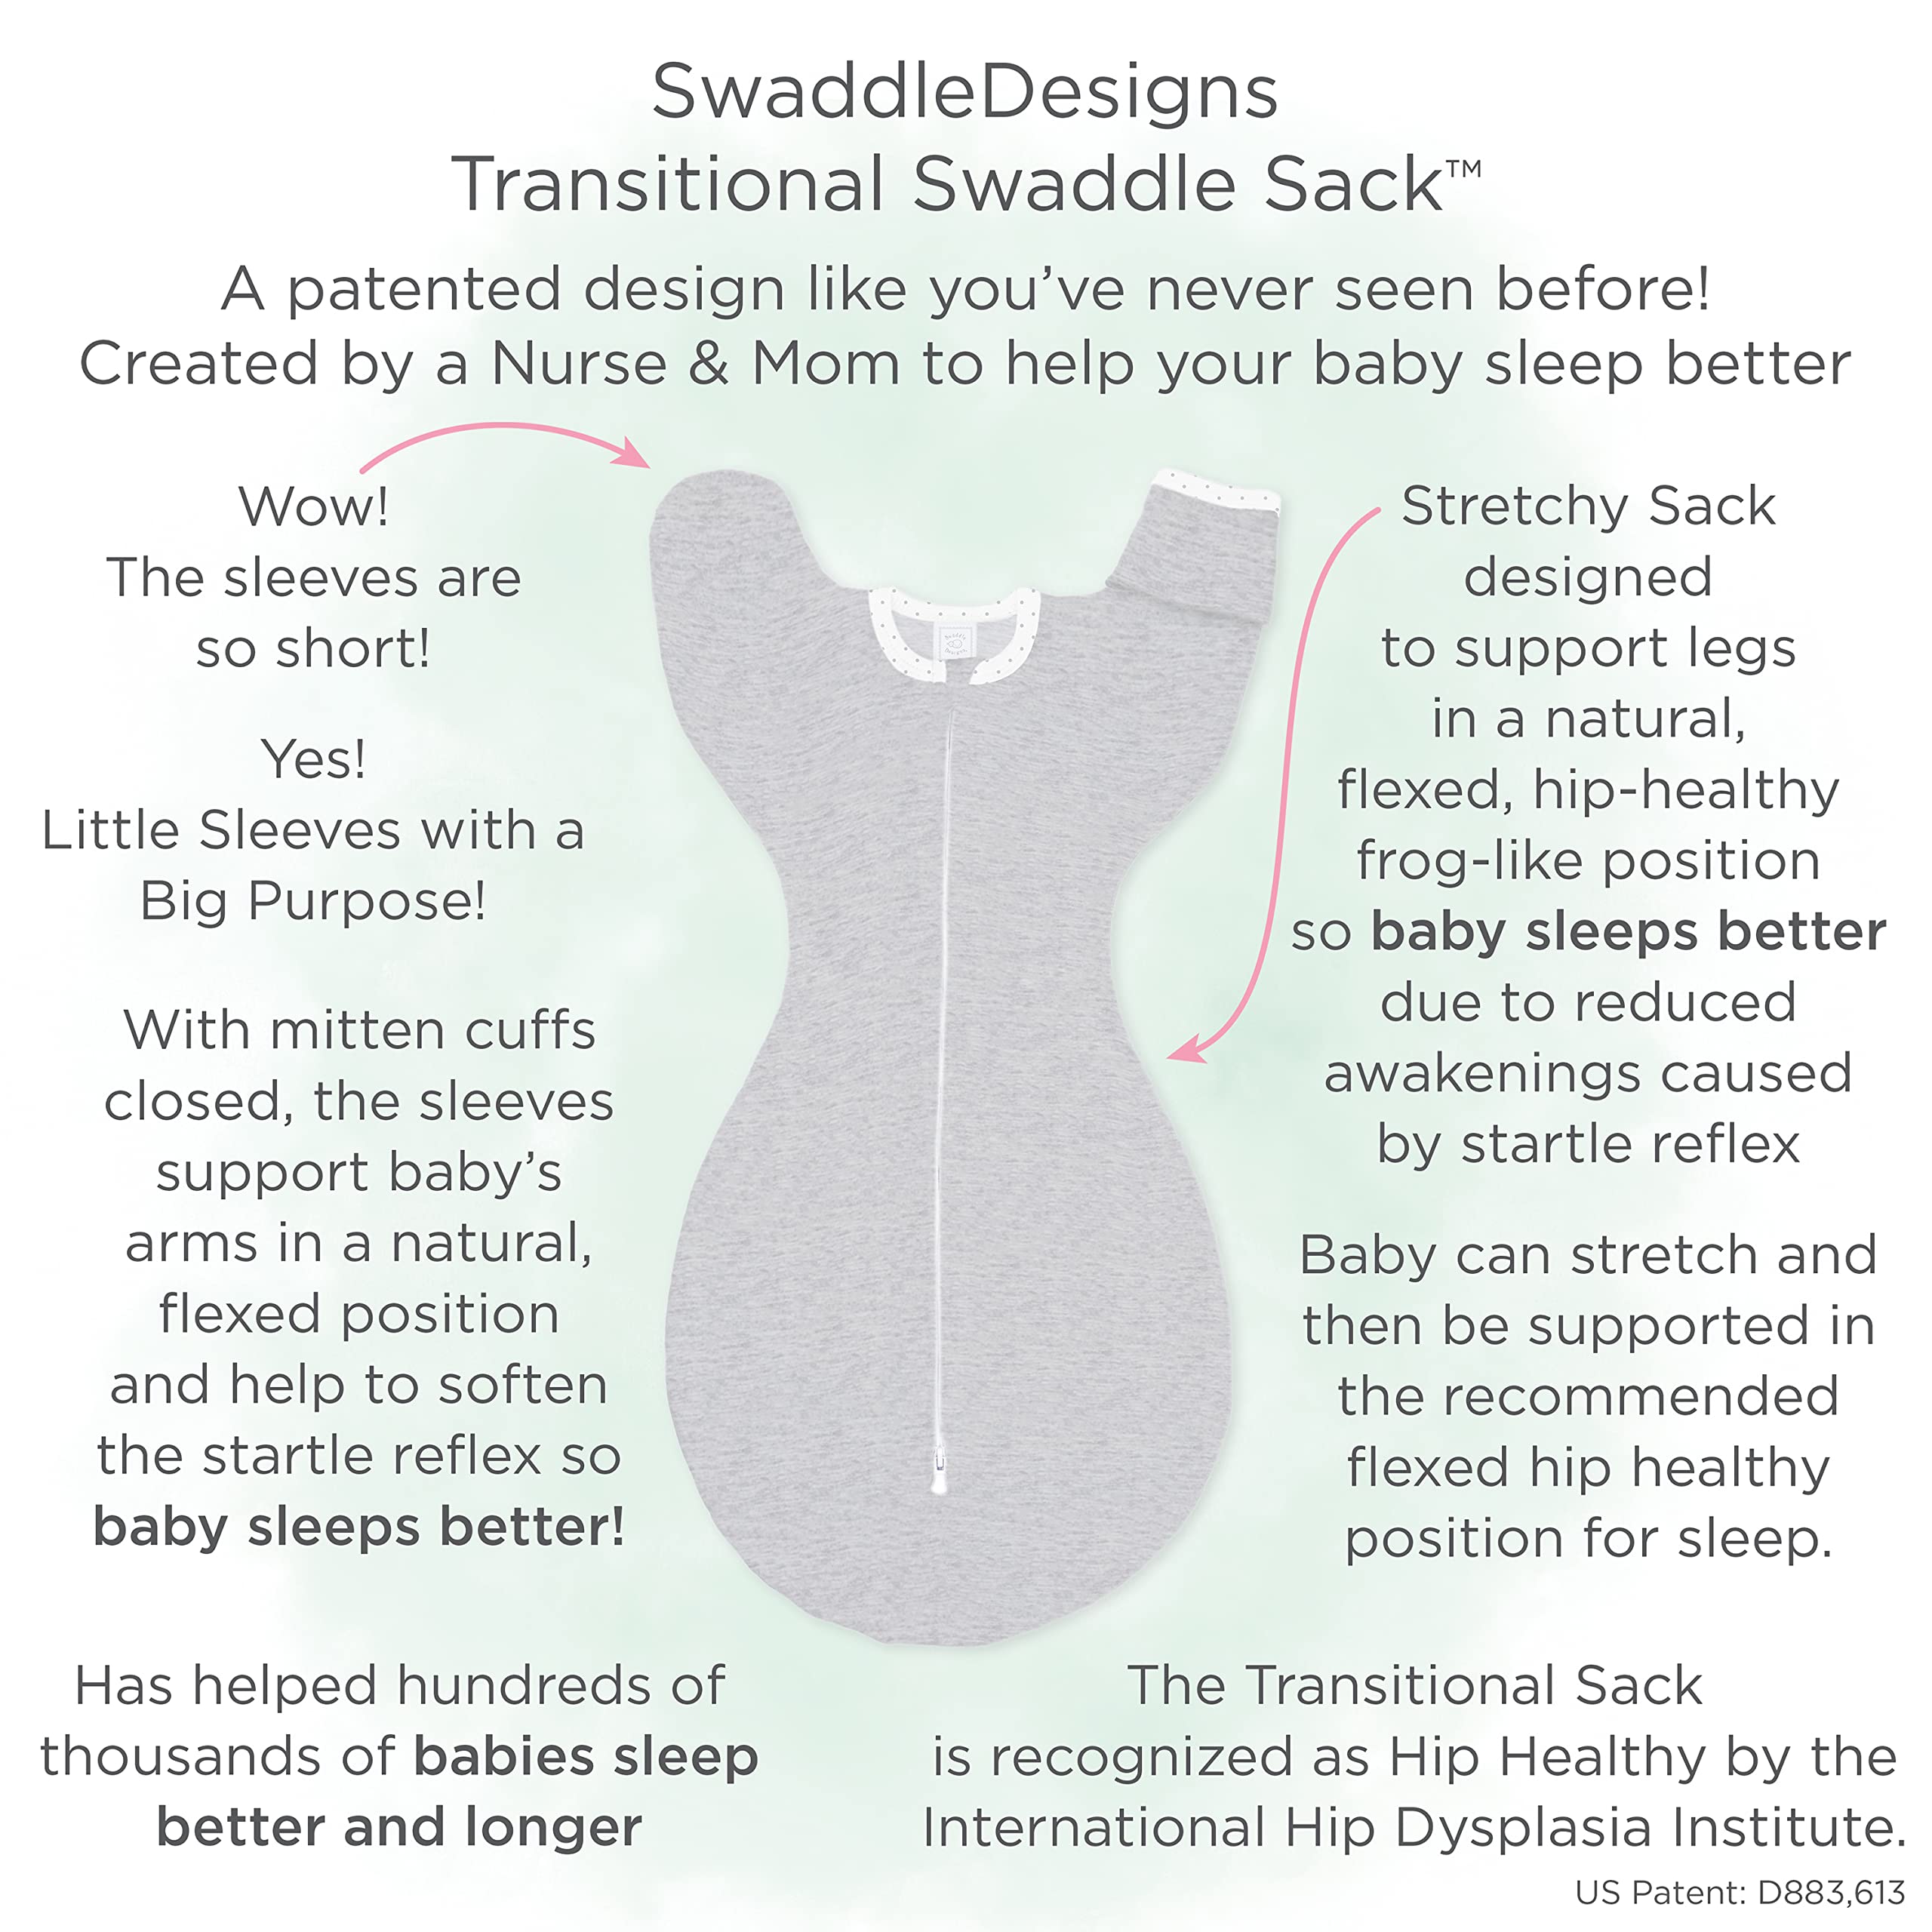 SwaddleDesigns Transitional Swaddle Sack with Arms Up Half-Length Sleeves and Mitten Cuffs, Watercolor Mountains & Trees, Medium, 3-6 Mo, 14-21 lbs (Better Sleep, Easy Swaddle Transition)